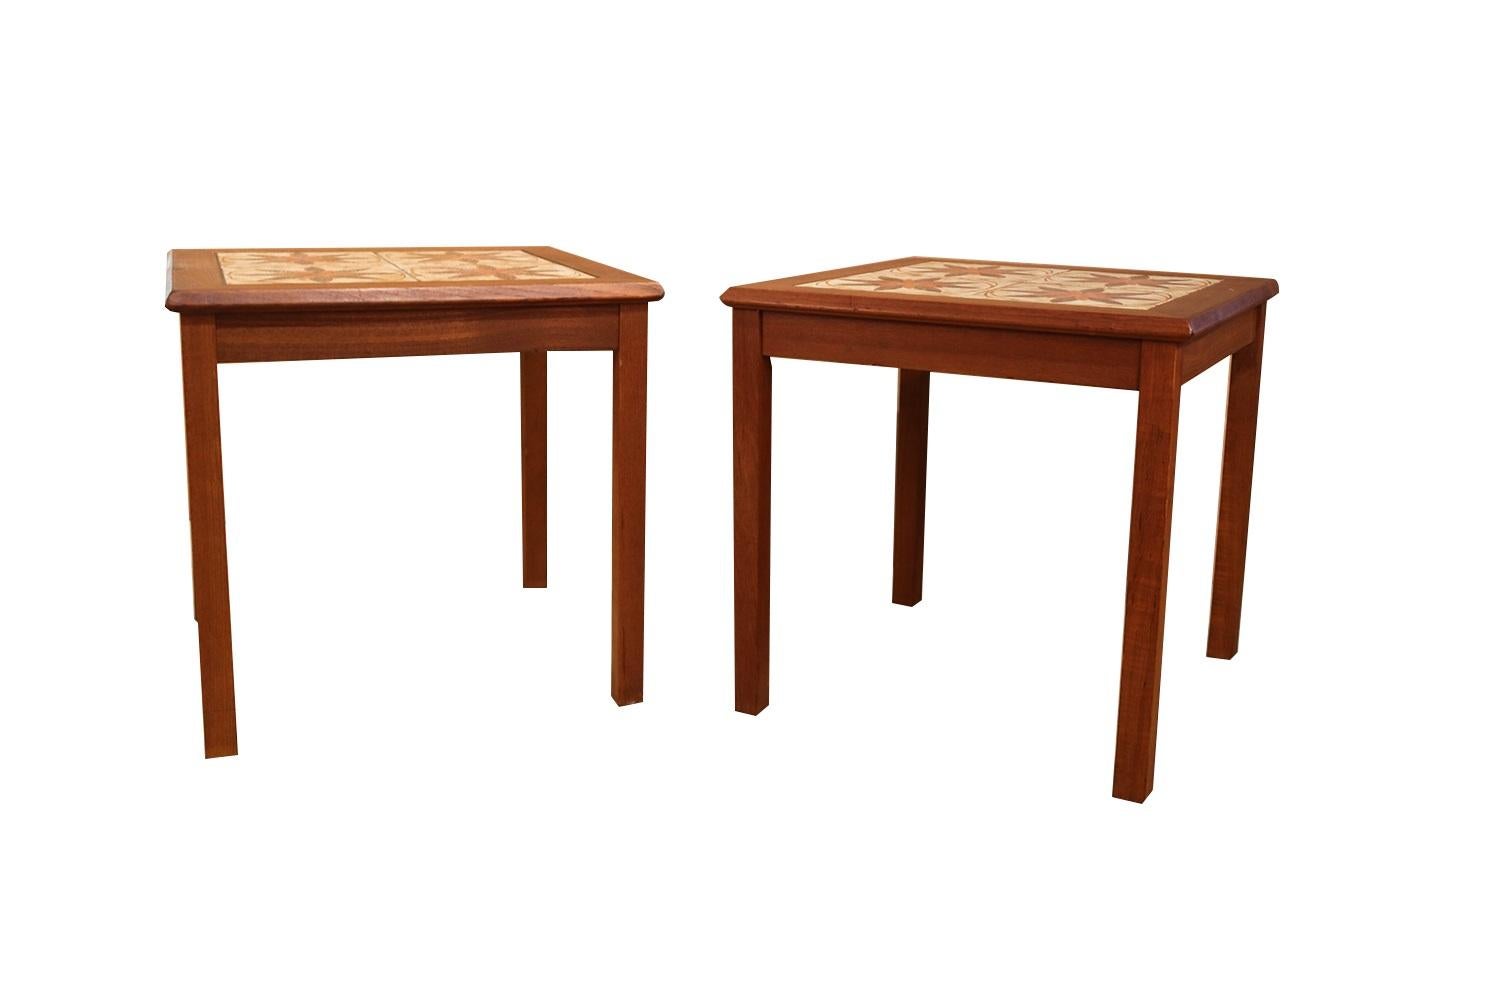 A beautiful set of Danish modern teak tile top square side/end tables attributed to Mobelfabrikken Toften of Denmark during the 1960s. The tabletop features 4 matching ceramic tiles framed in teak over four square solid teak legs. The tiles are